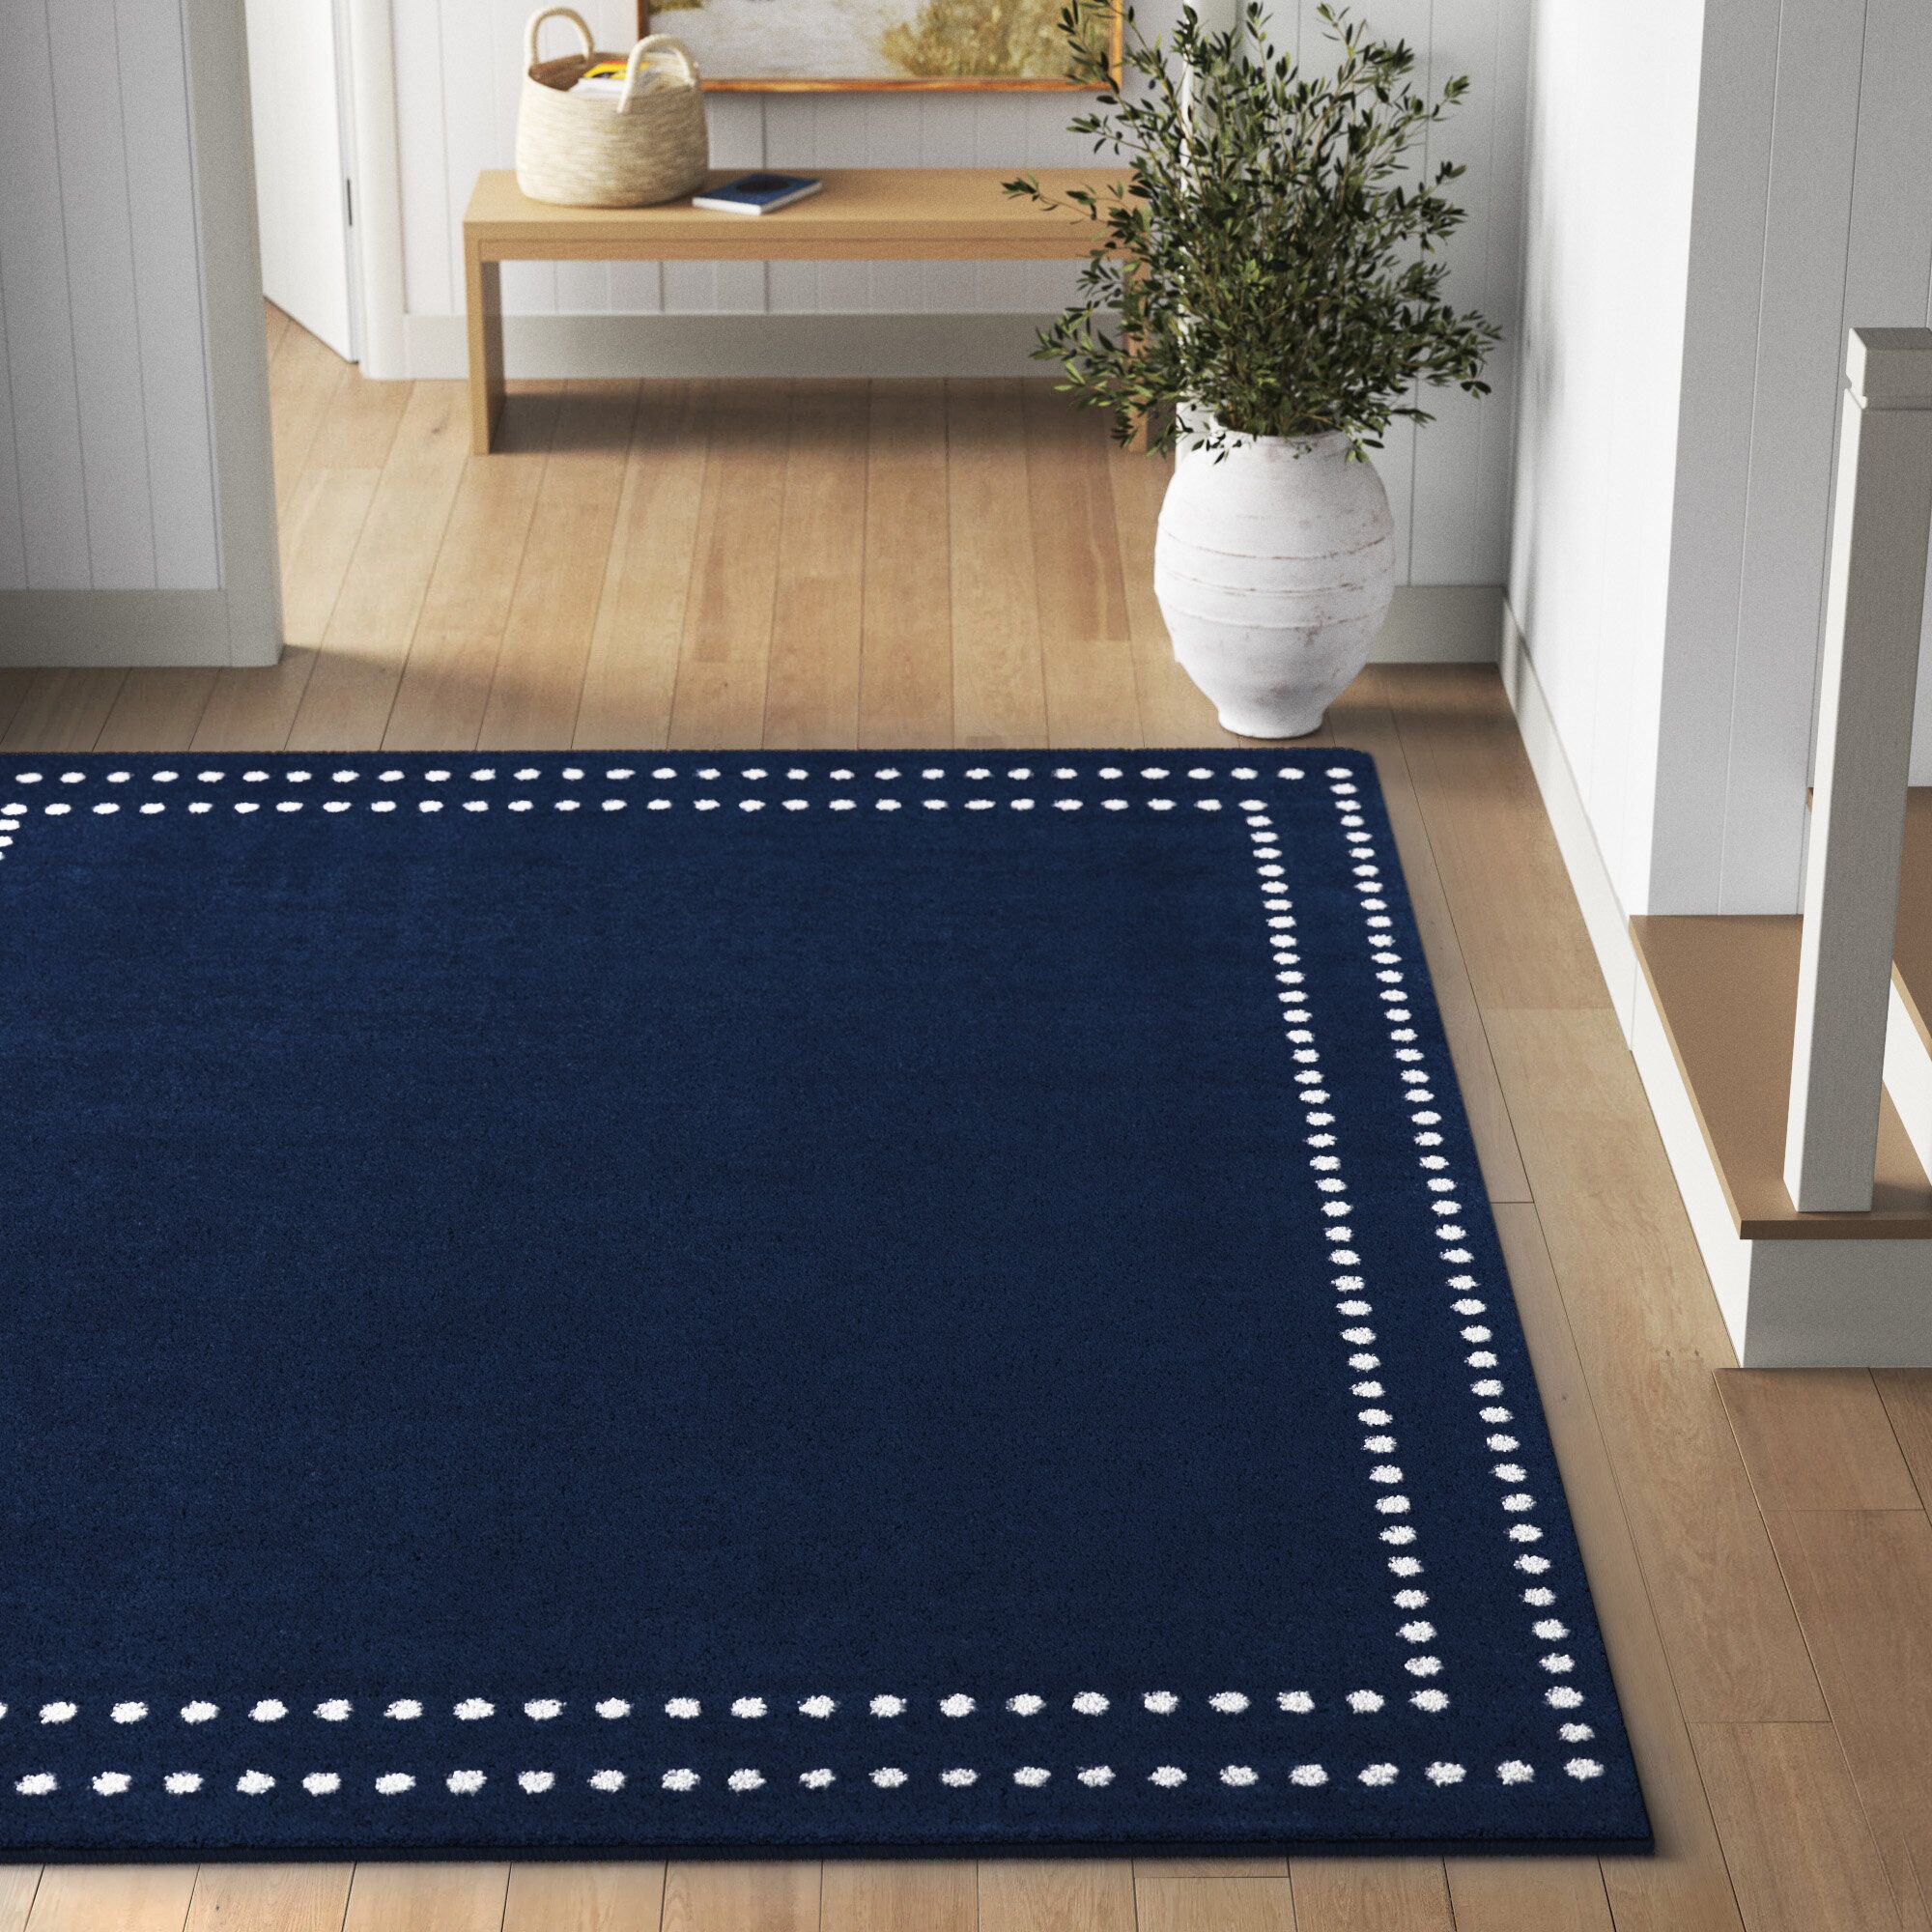 Sand & Stable Toston Performance Navy Blue Rug & Reviews | Wayfair Regarding Navy Blue Rugs (View 3 of 15)